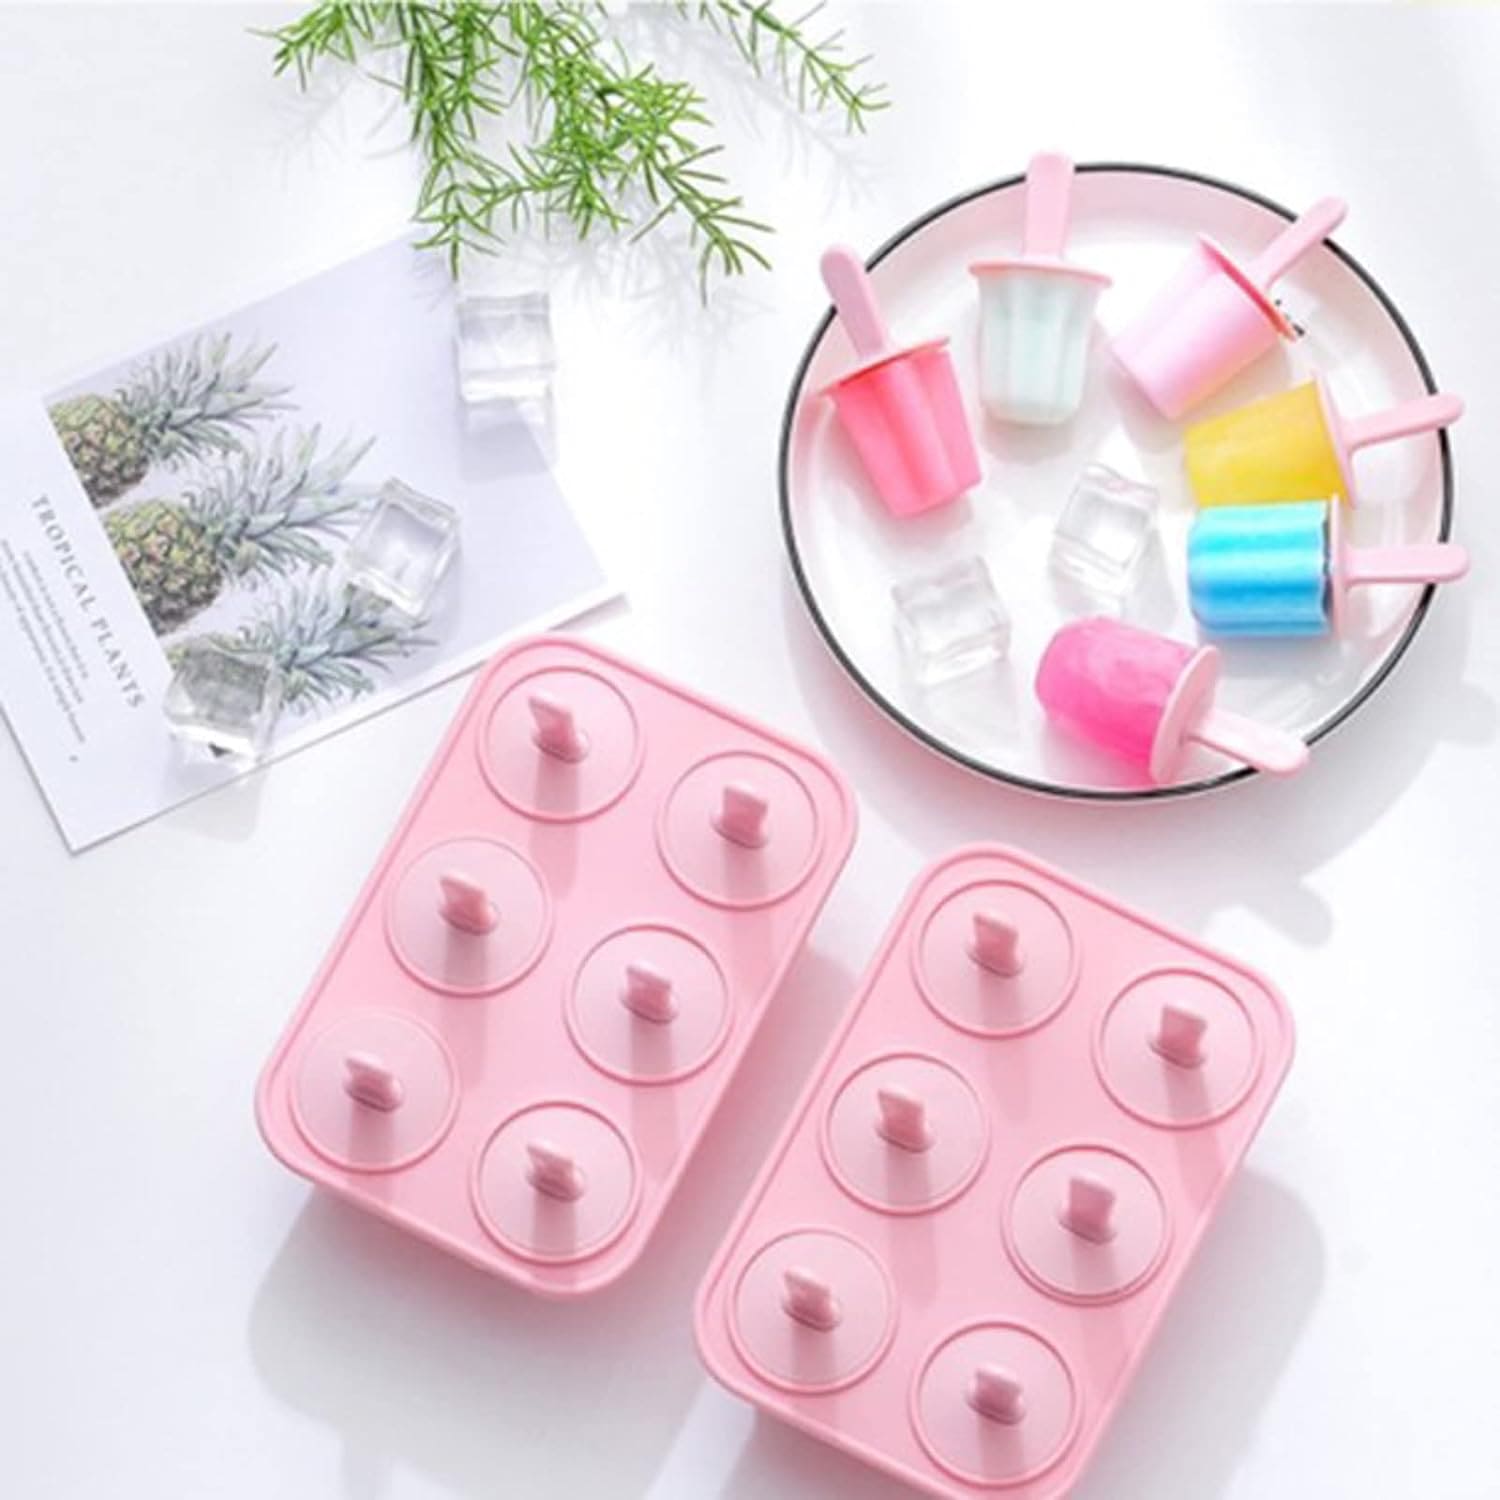 New Silicon Summer Ice Tray, 6 Hole Popsicle Mold, Reusable DIY Homemade Ice Cream Maker Tools, Ice Pole Jelly Popsicle Mold with Reusable Stick, Mini Dormitory Ice Maker for Chilling Cool Drinks